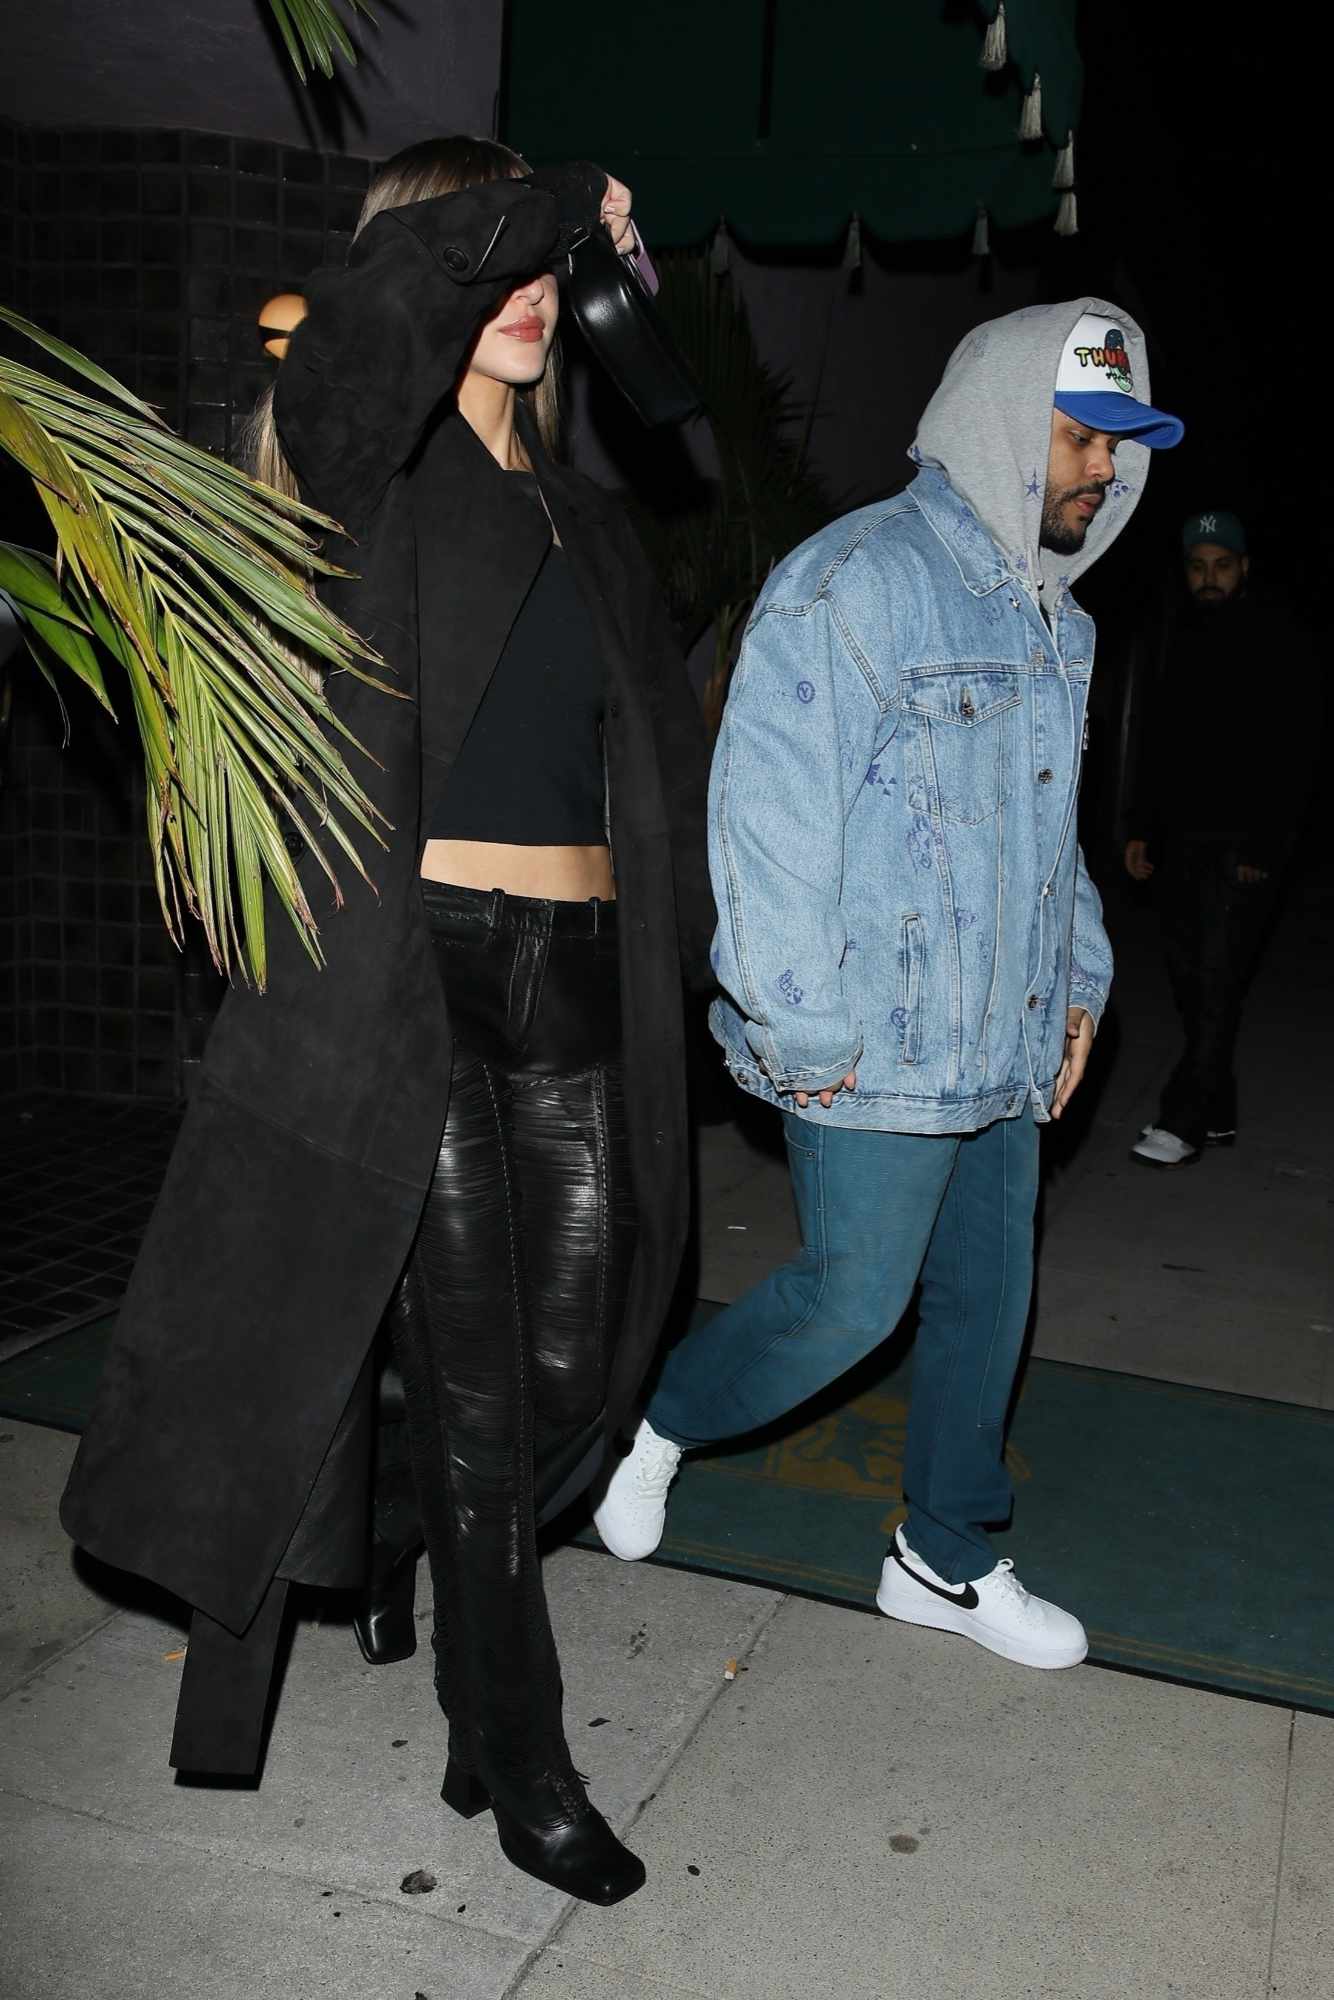 The Weeknd & Simi Khadra seen out in Beverly hills wearing a black jacket & pants and a denim jacket and jeans